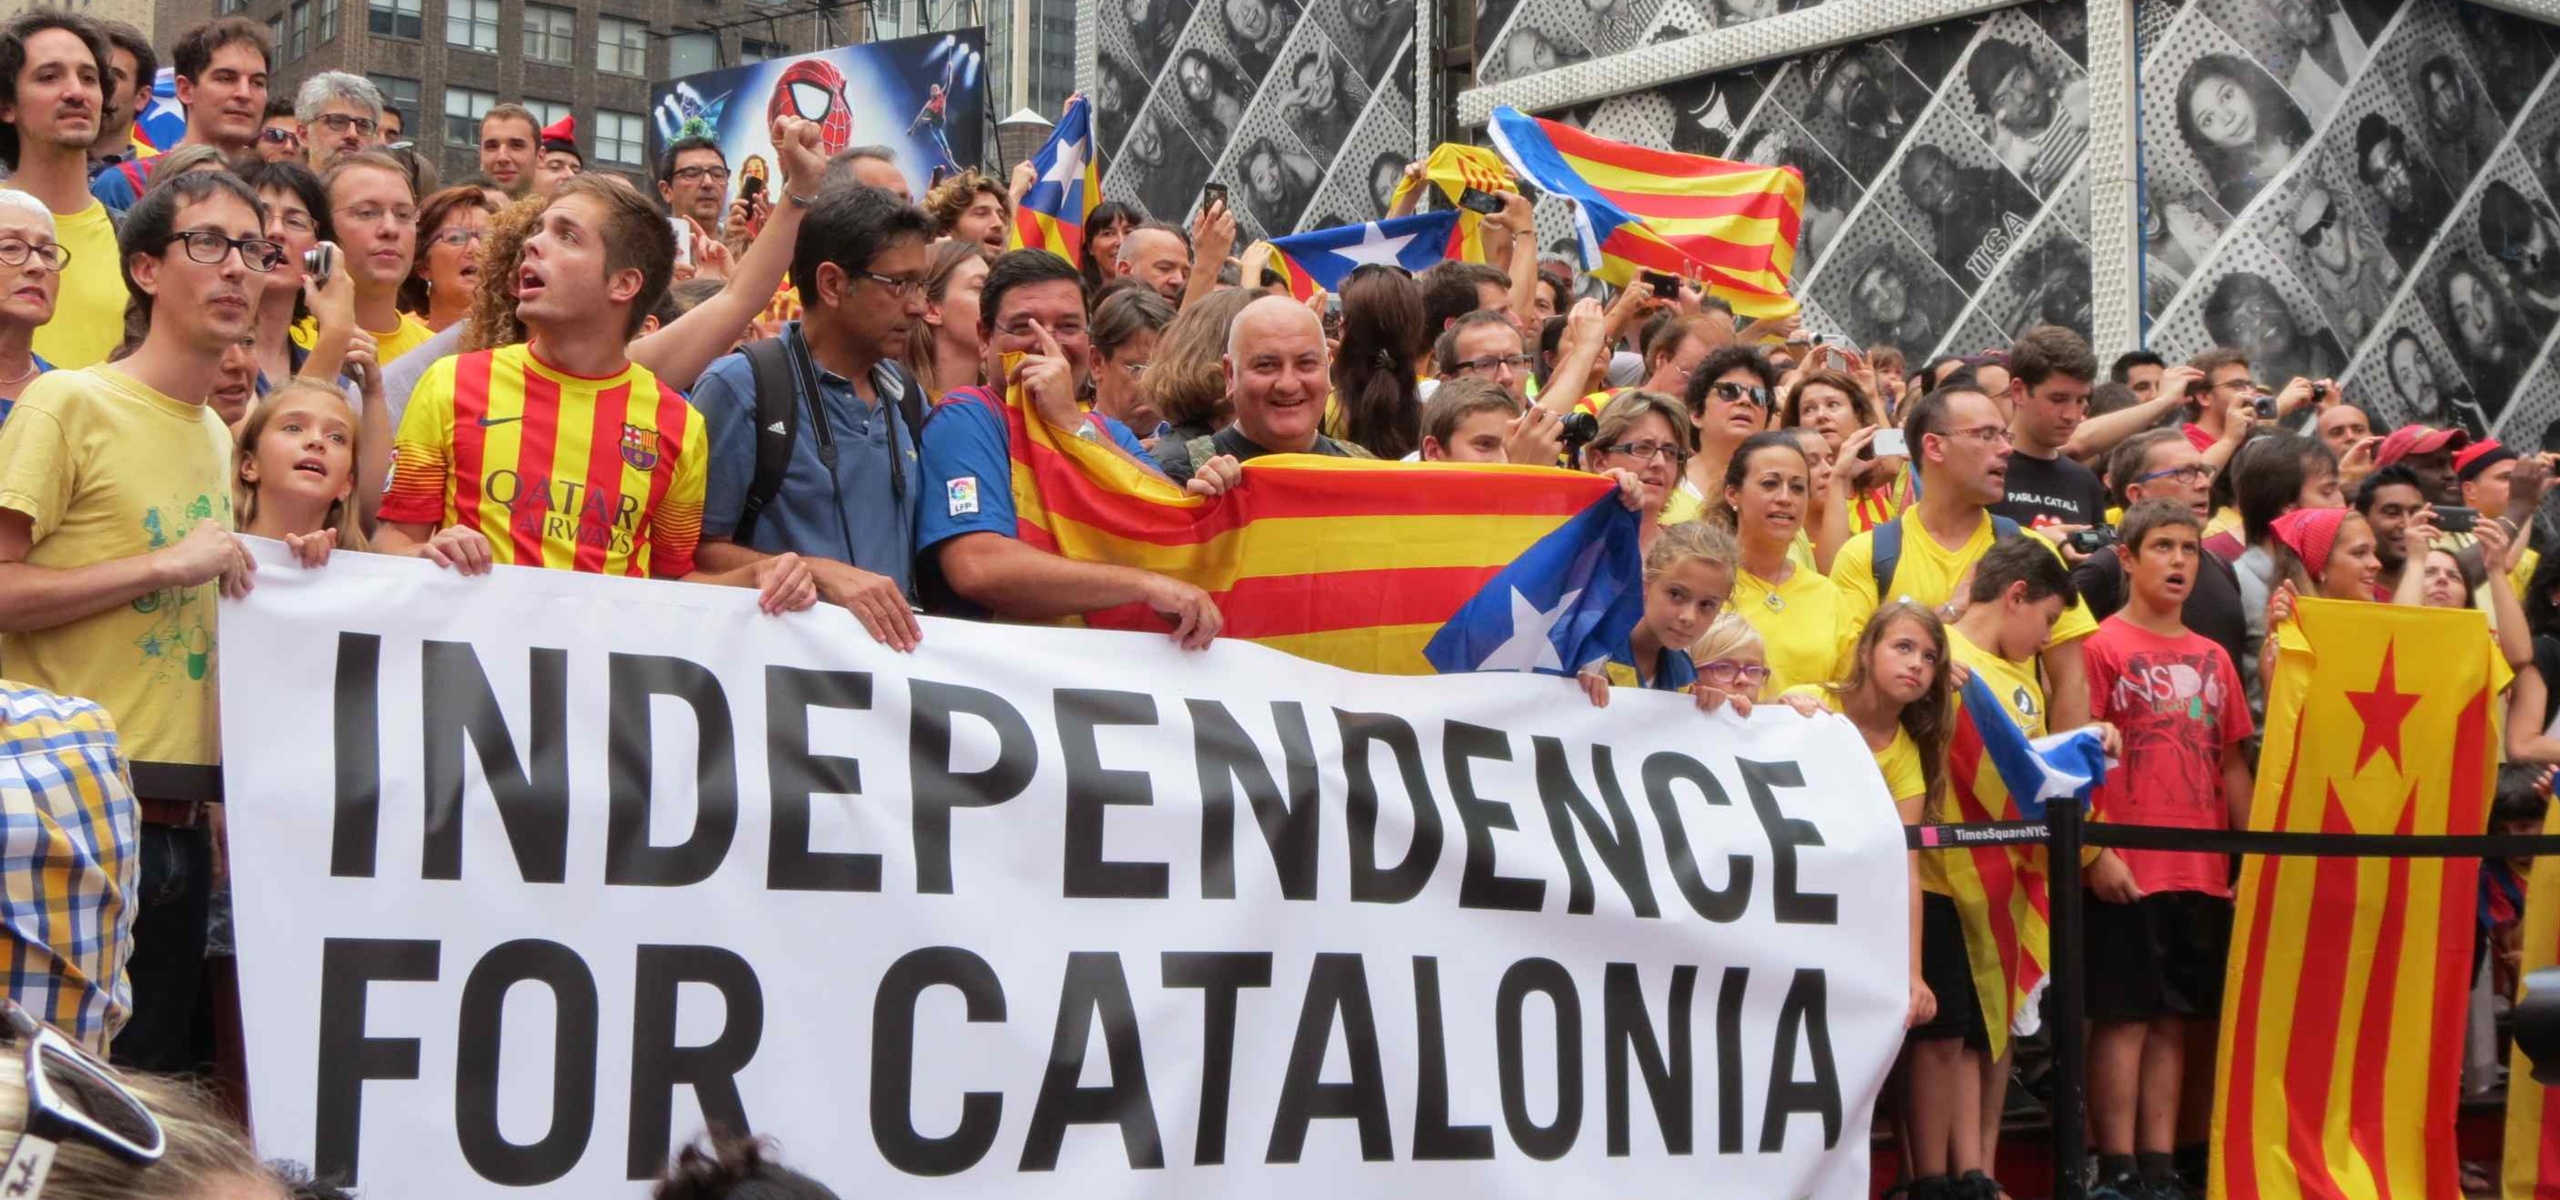 The Season of Self-Determination: An Analysis of Catalonia's Independence Referendum